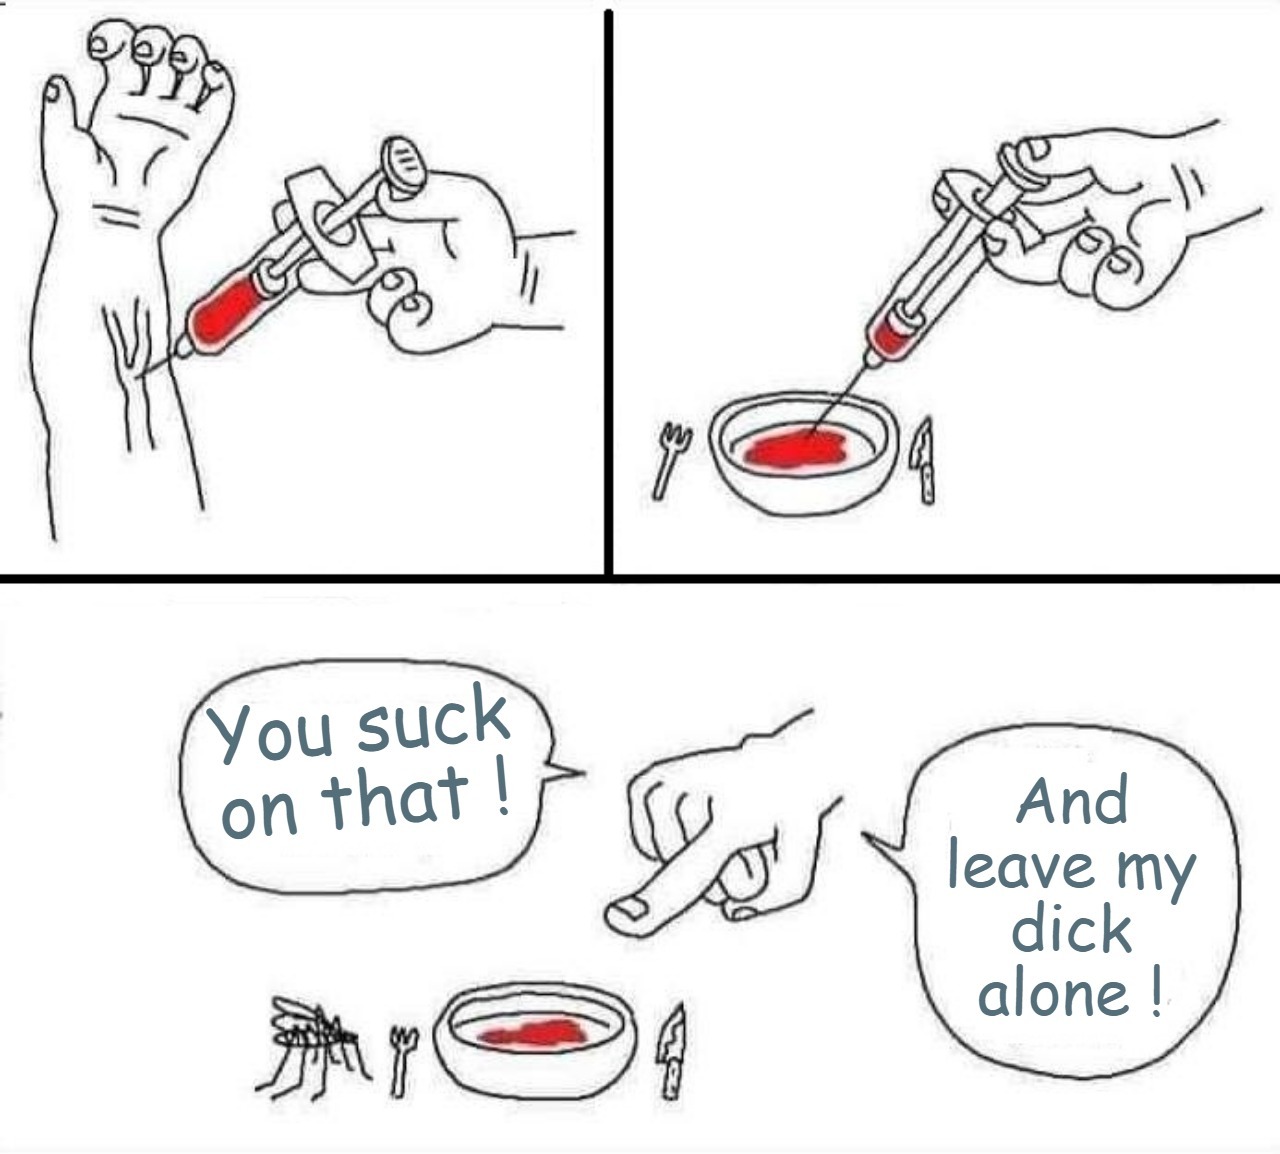 Why are you gay, Mr. Mosquito ? - meme.